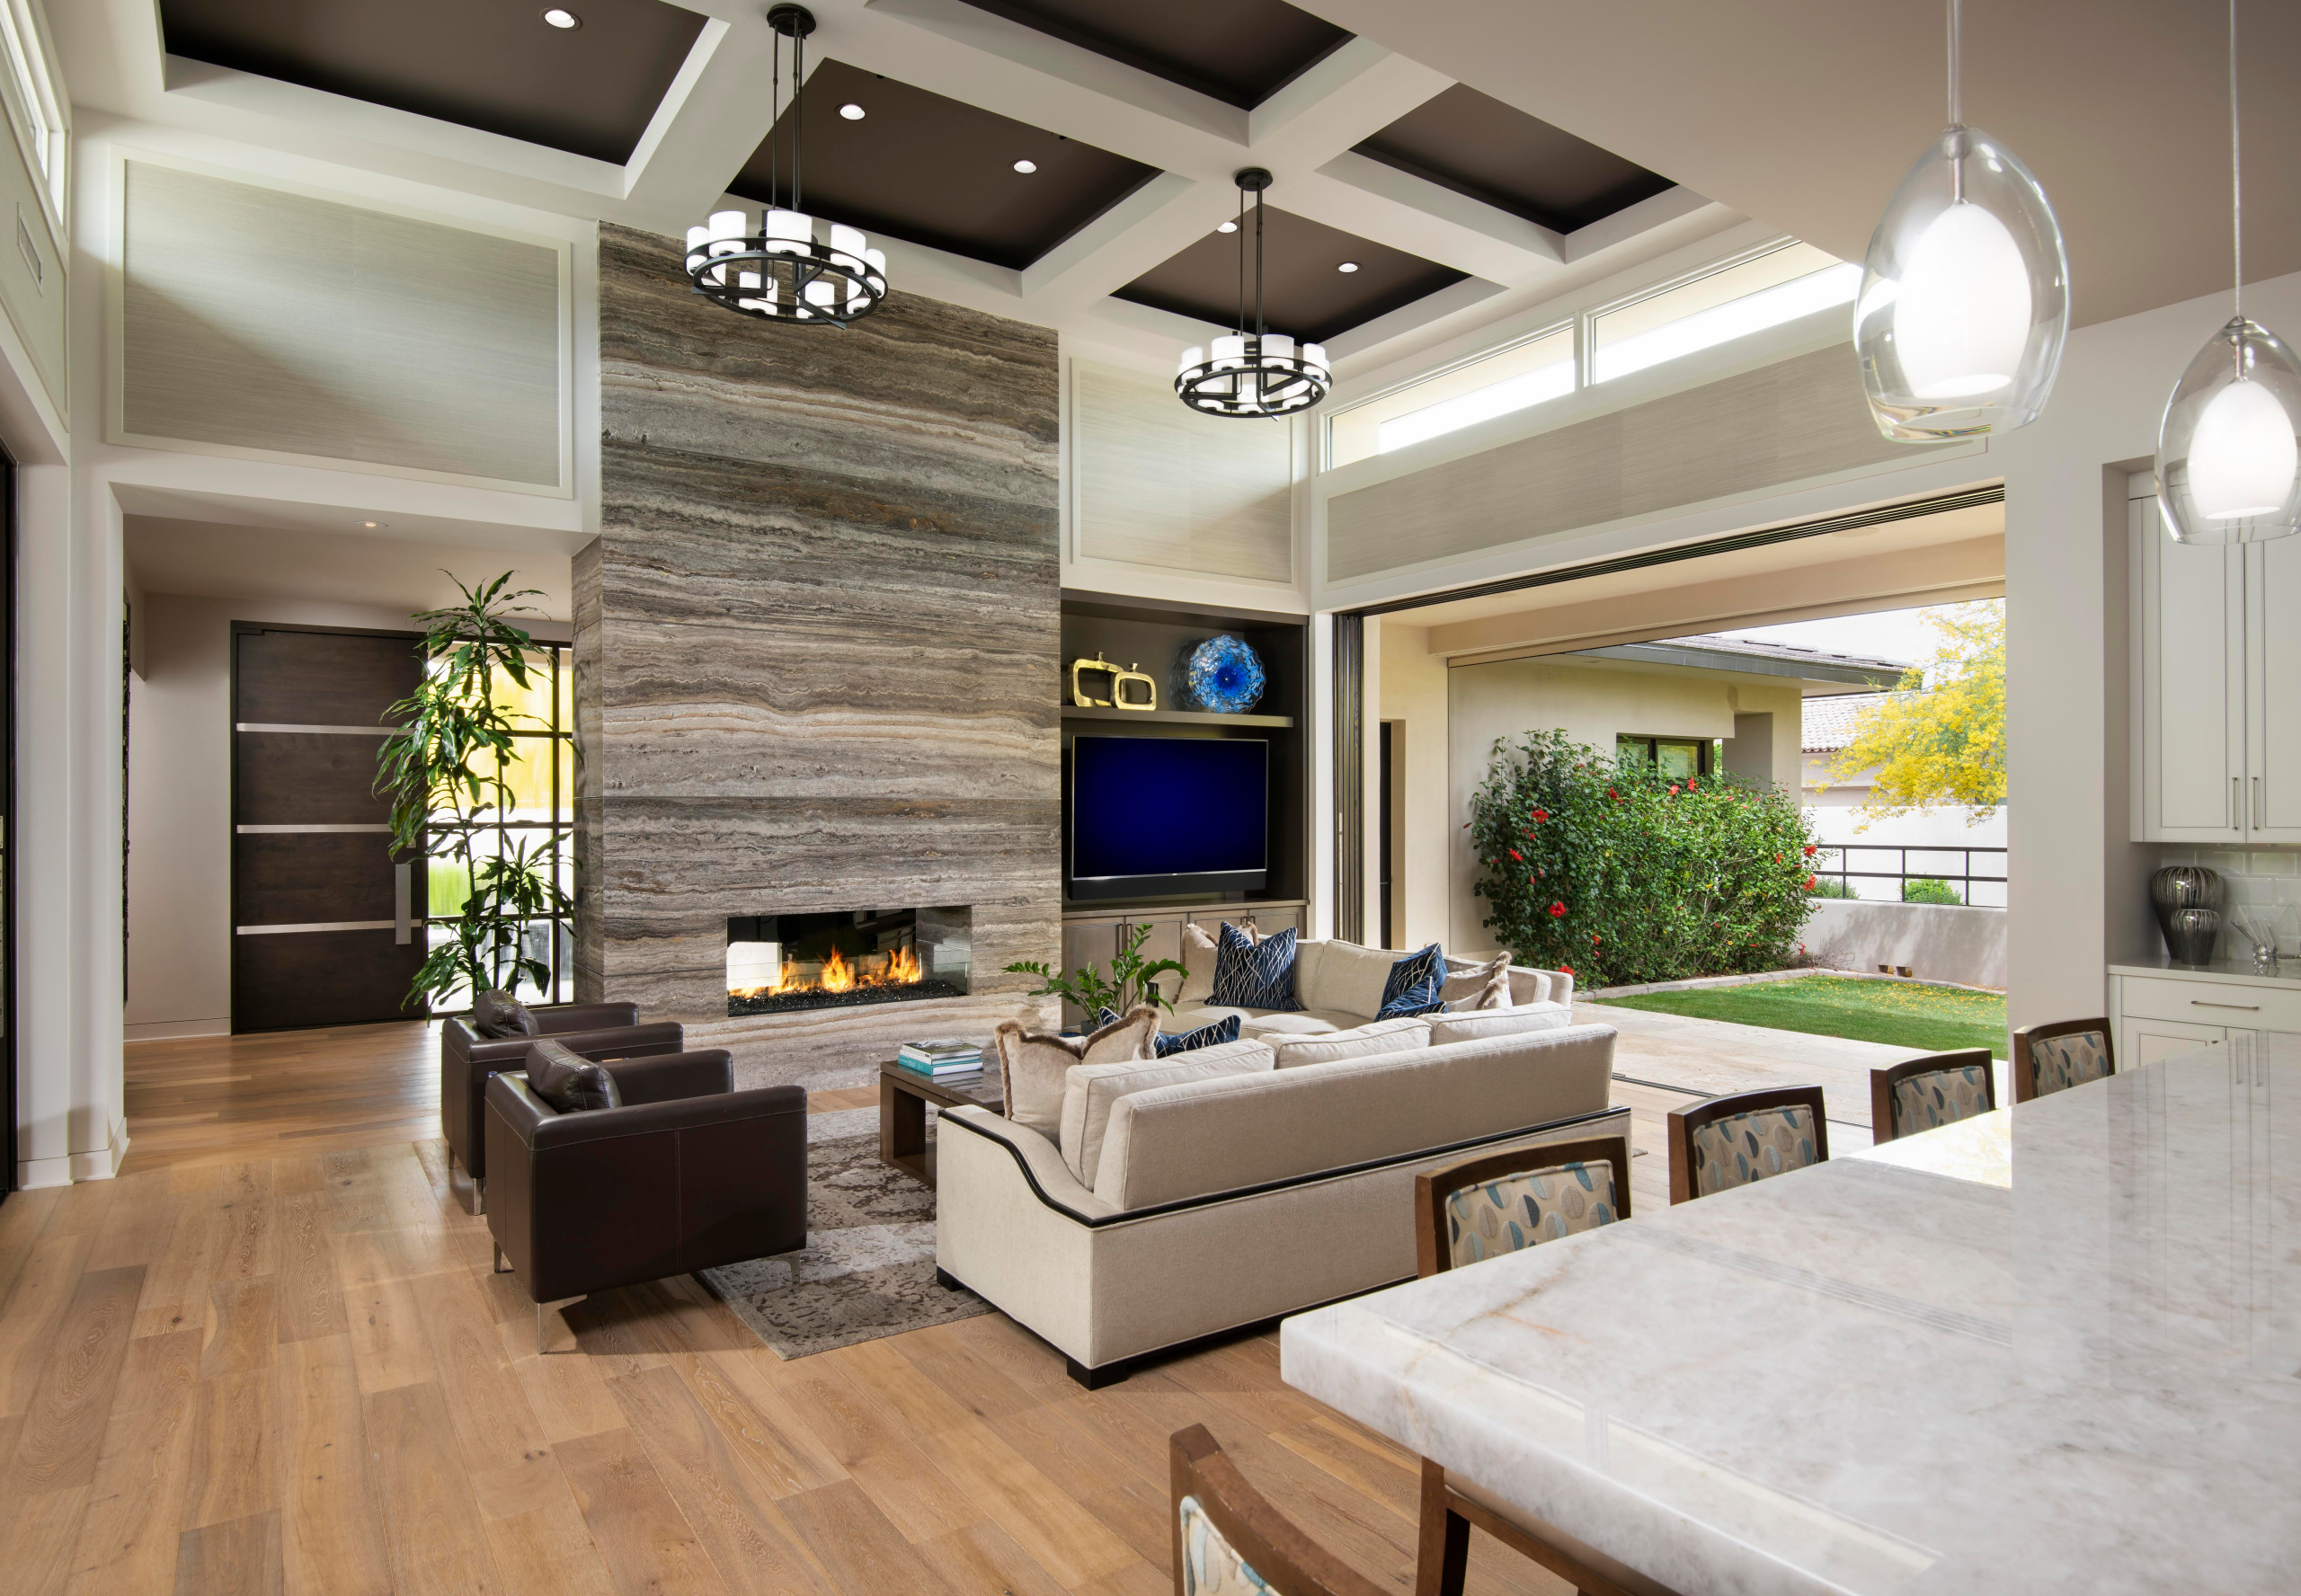 75 Beautiful Living Room Pictures Ideas December 2020 Houzz